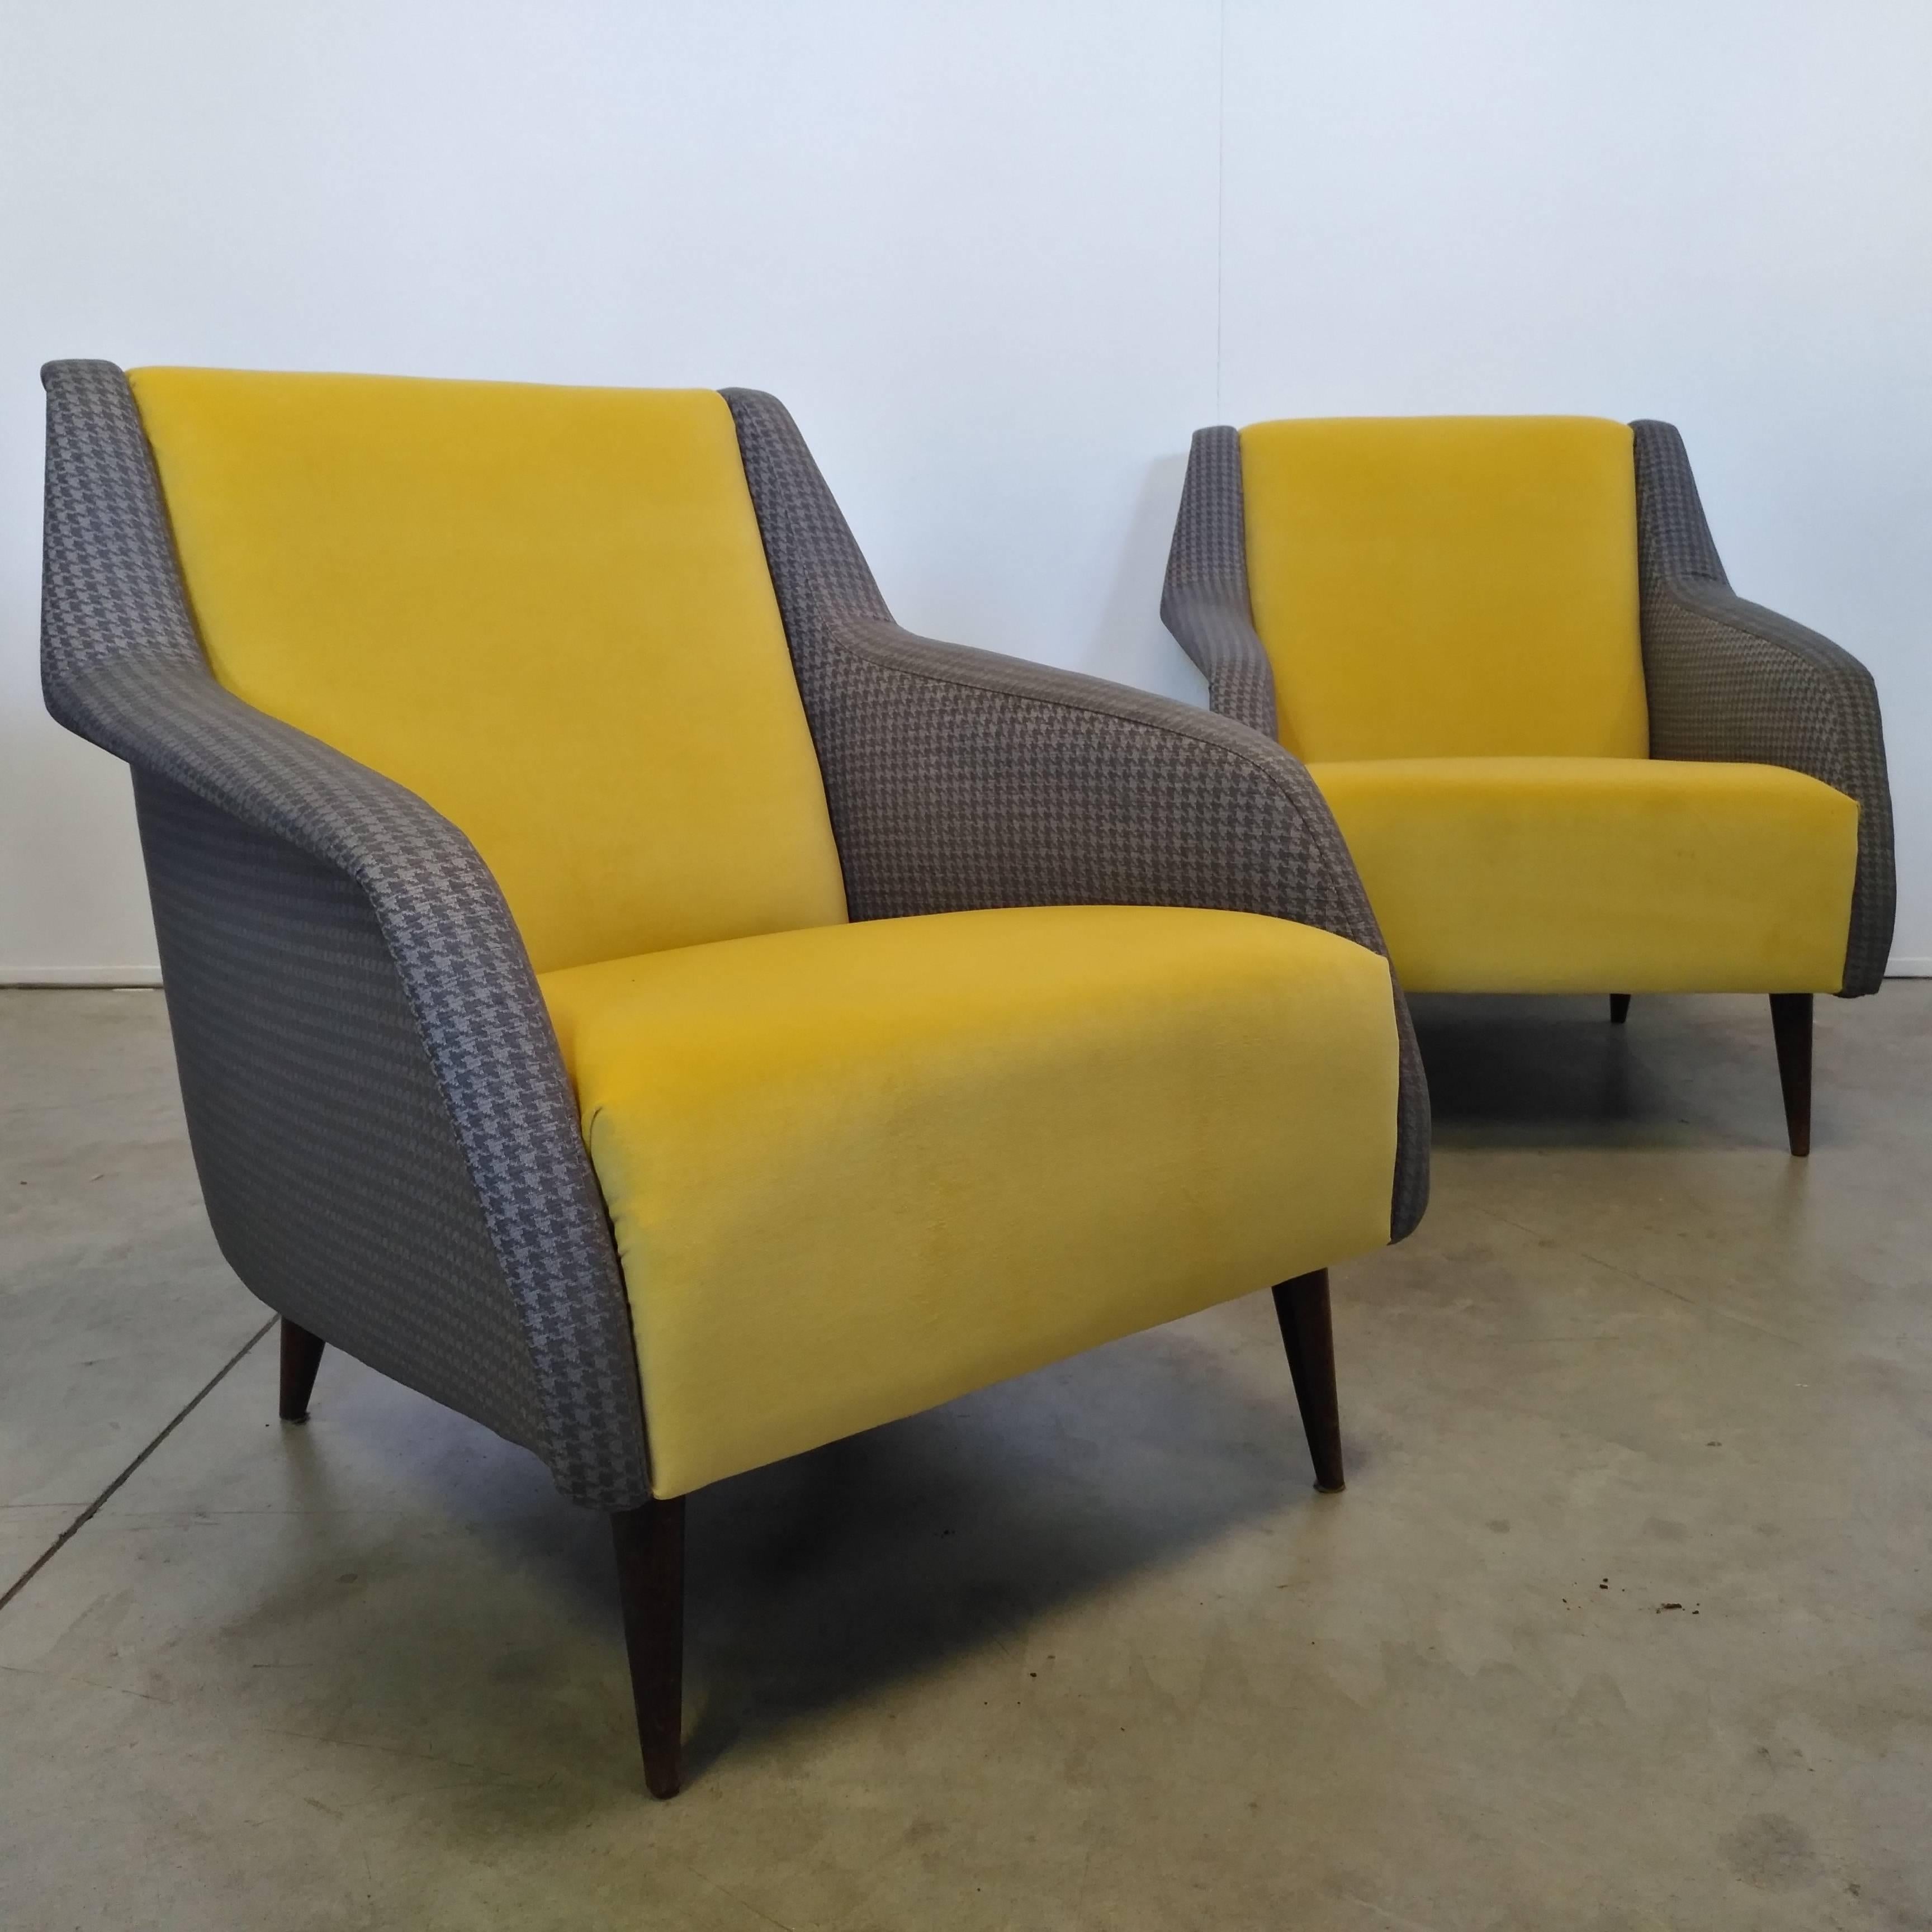 Beautiful set composed by a two seats sofa and two armchairs designed by Carlo de Carli in 1950
Reupholstered with yellow and grey velvet
Measures: The armchairs are width cm 65, depth cm 75, height cm 75
The sofa is width cm 140, depth cm 75,